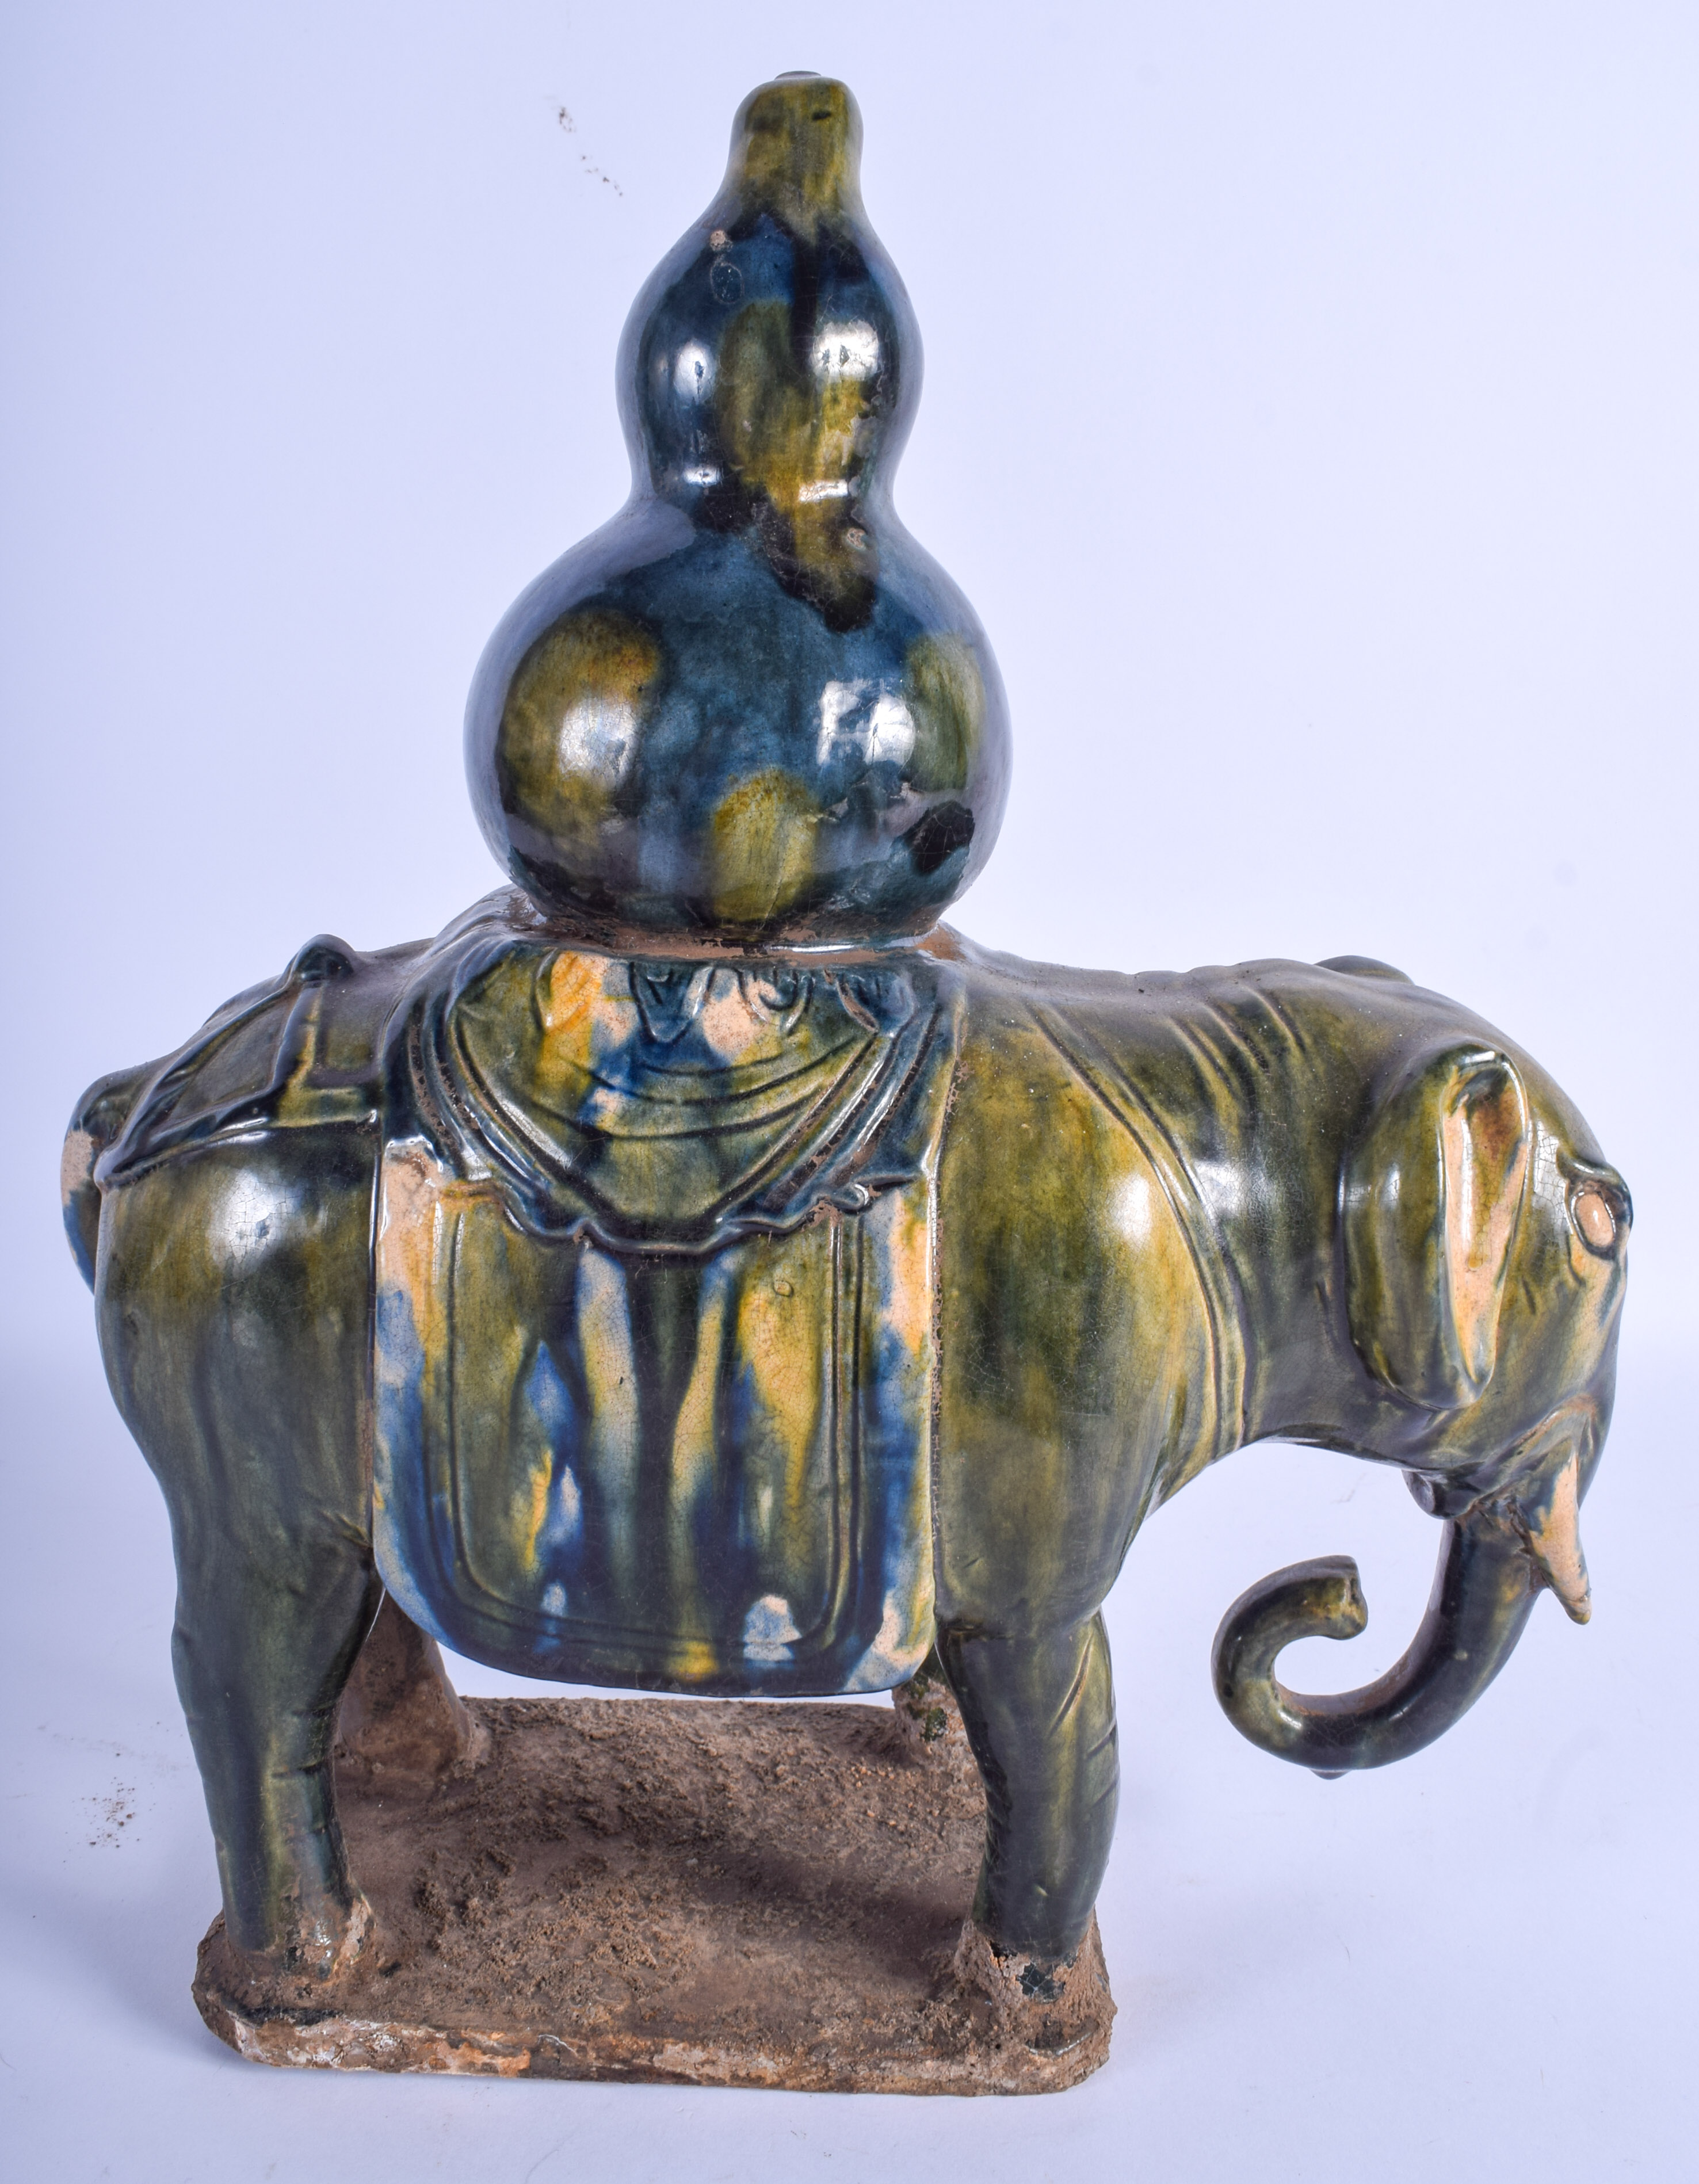 A LARGE CHINESE MAJOLICA EARTHENWARE POTTERY ELEPHANT 20th Century, with drip glazed decoration. 33 - Image 2 of 3